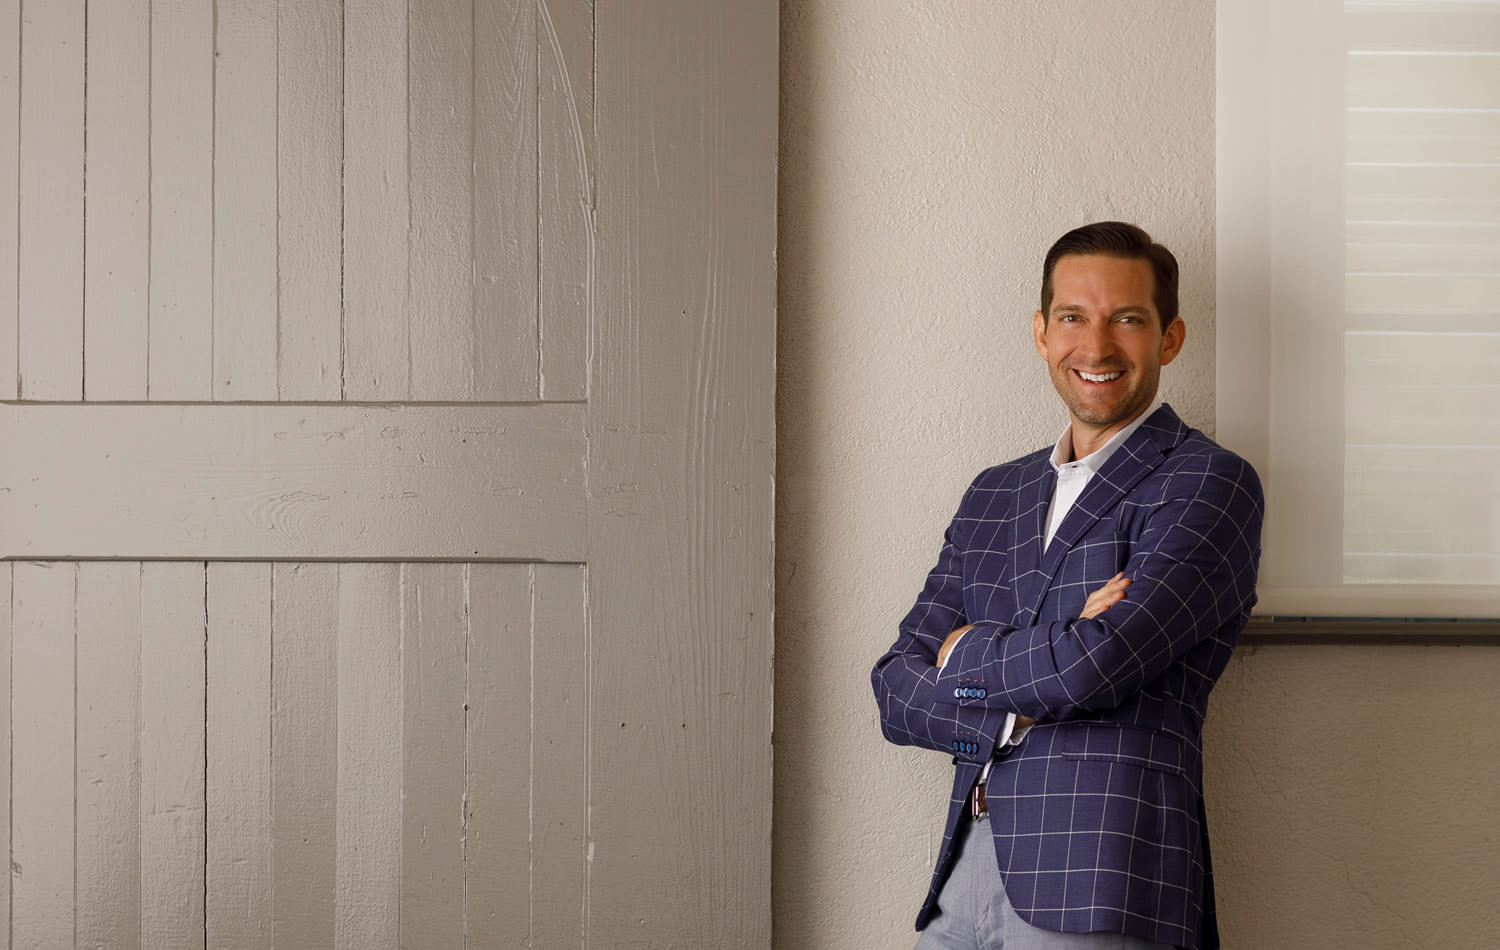 Day in the Life: A Glimpse into the Creative World of Interior Designer Dwayne Bergmann